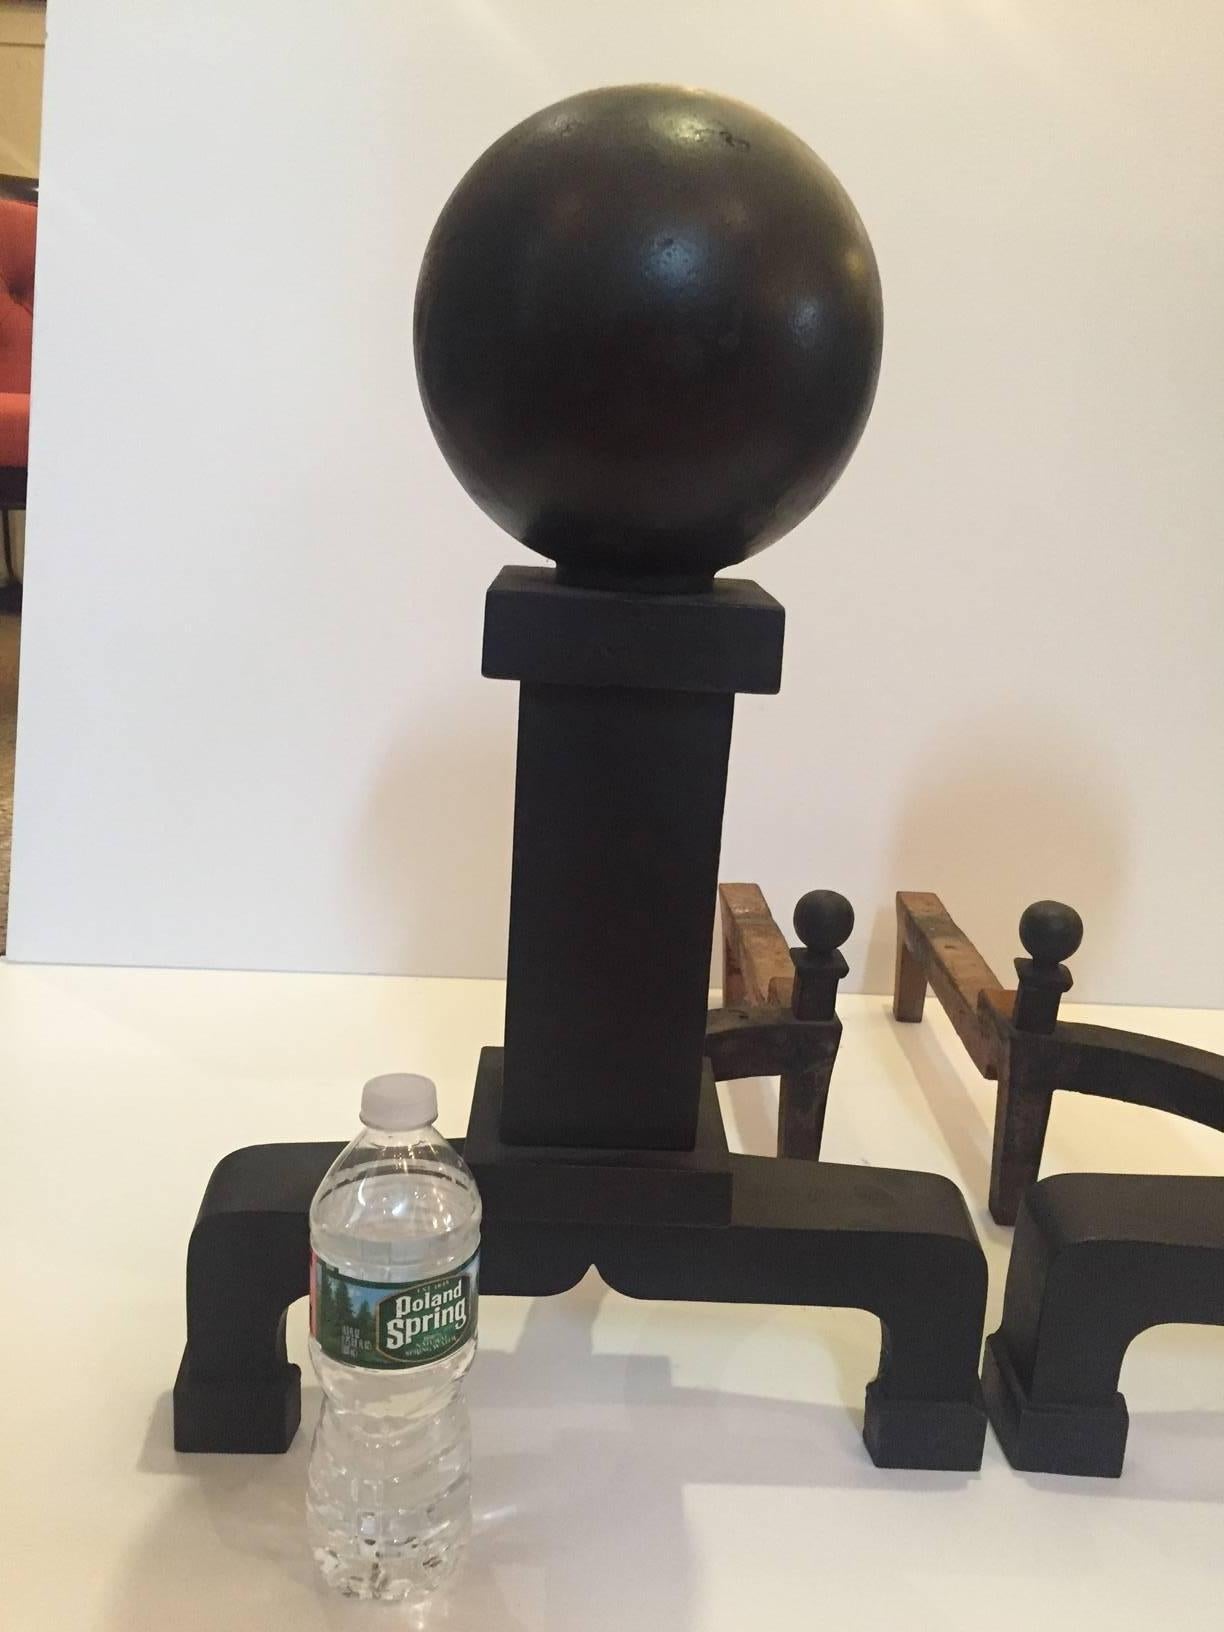 Impressive in scale, masculine and gutsy pair of black iron cannonball and irons.
There are little ball finials on the back that echo the monumental ones in front.
See how massive these are in size as shown in relation to the water bottle in one